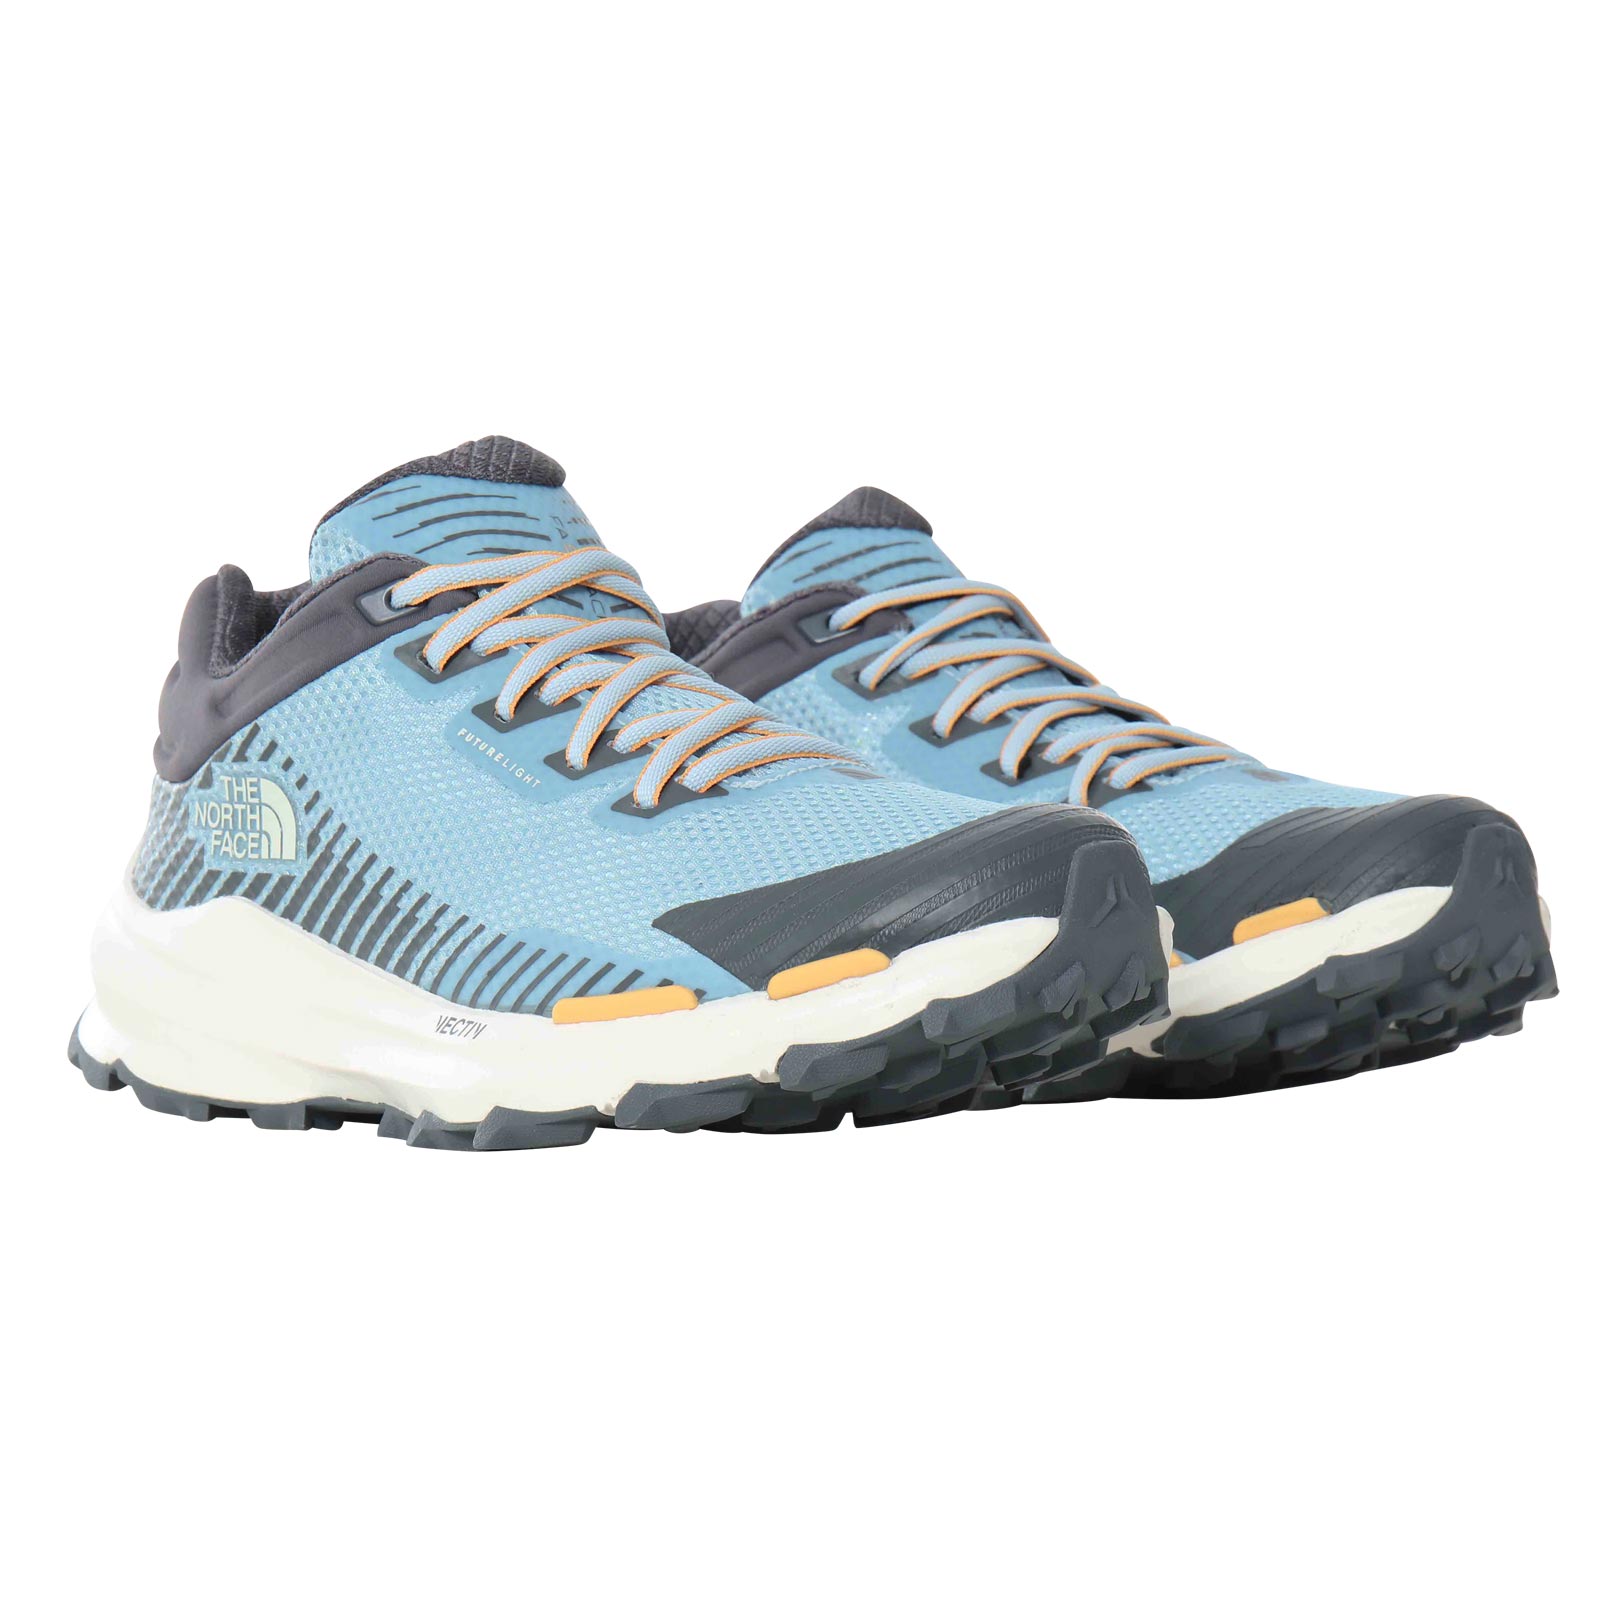 THE NORTH FACE VECTIV™ FASTPACK FUTURELIGHT™ WOMENS HIKING SHOES